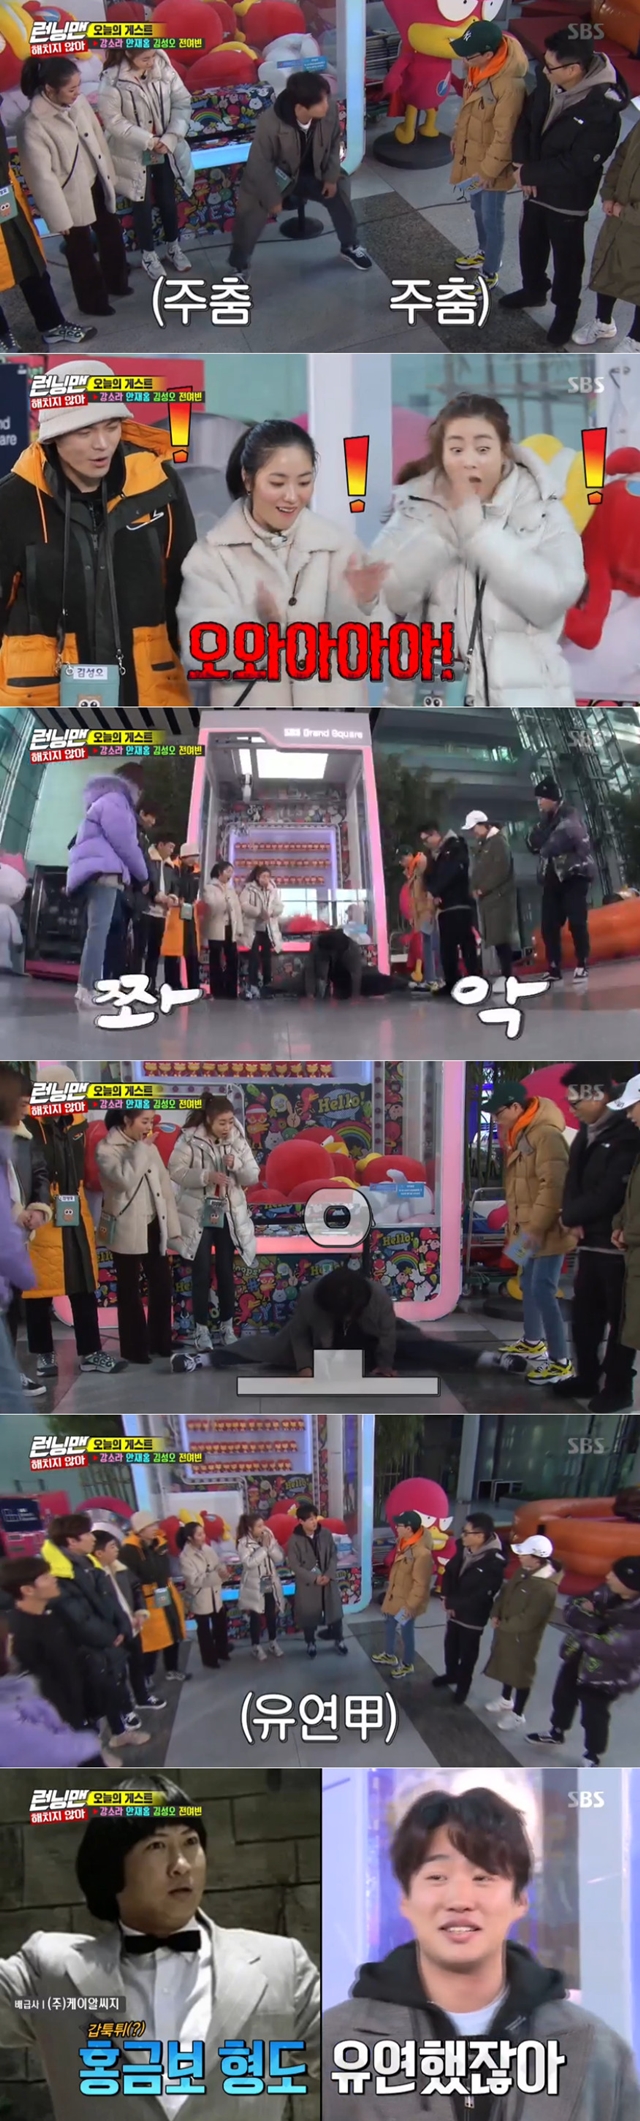 Actor Ahn Jae-hong succeeded in tearing 180 Degree legsActor Jang So-ra, Ahn Jae-hong, Kim Sung-oh and Jeon Yeo-bin appeared as guests on SBS Running Man broadcast on January 12th.Ahn Jae-hong boasted of Yoo Yeon-seong, deftly tearing his legs in the opening shoot, so Yang expressed surprise that he didnt look that way.Yoo Jae-seok asked, Are you sick? And Ahn Jae-hong replied, Its okay.Kim Jong-guk said, Hong Geum-bo used to be very flexible. There are people who do not look like that.hwang hye-jin